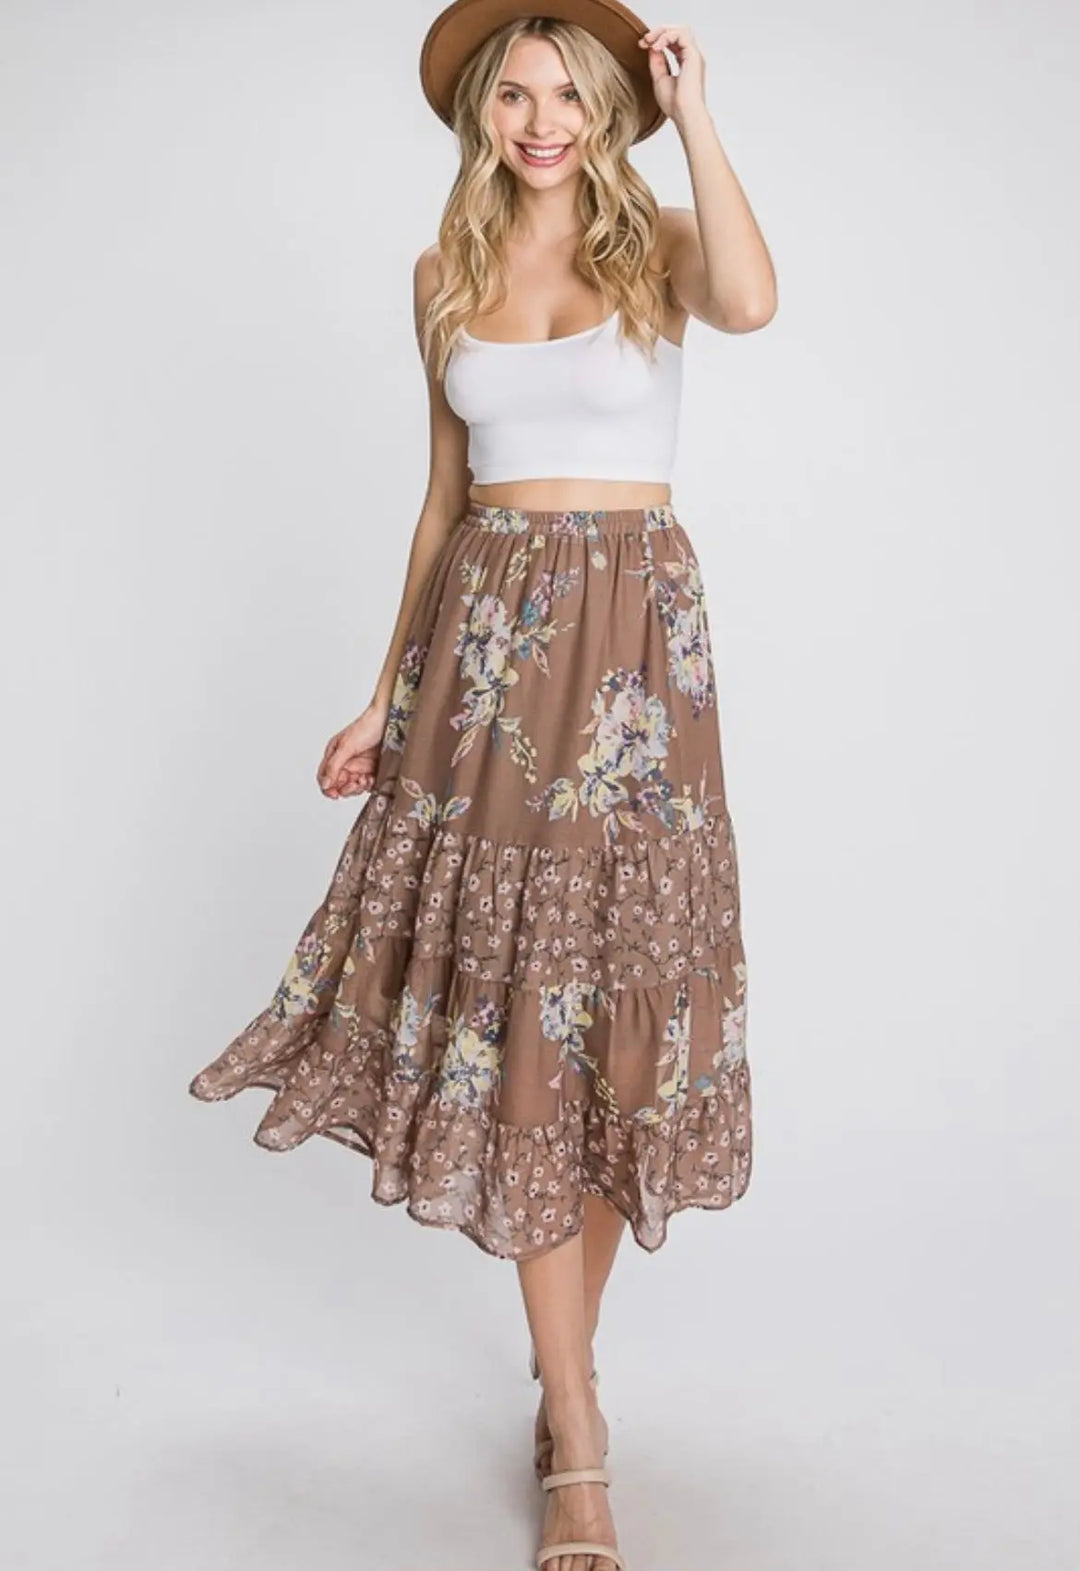 Mocha & Mauve Floral Skirt-skirt-Gee Gee-Styled by Steph-Women's Fashion Clothing Boutique, Indiana